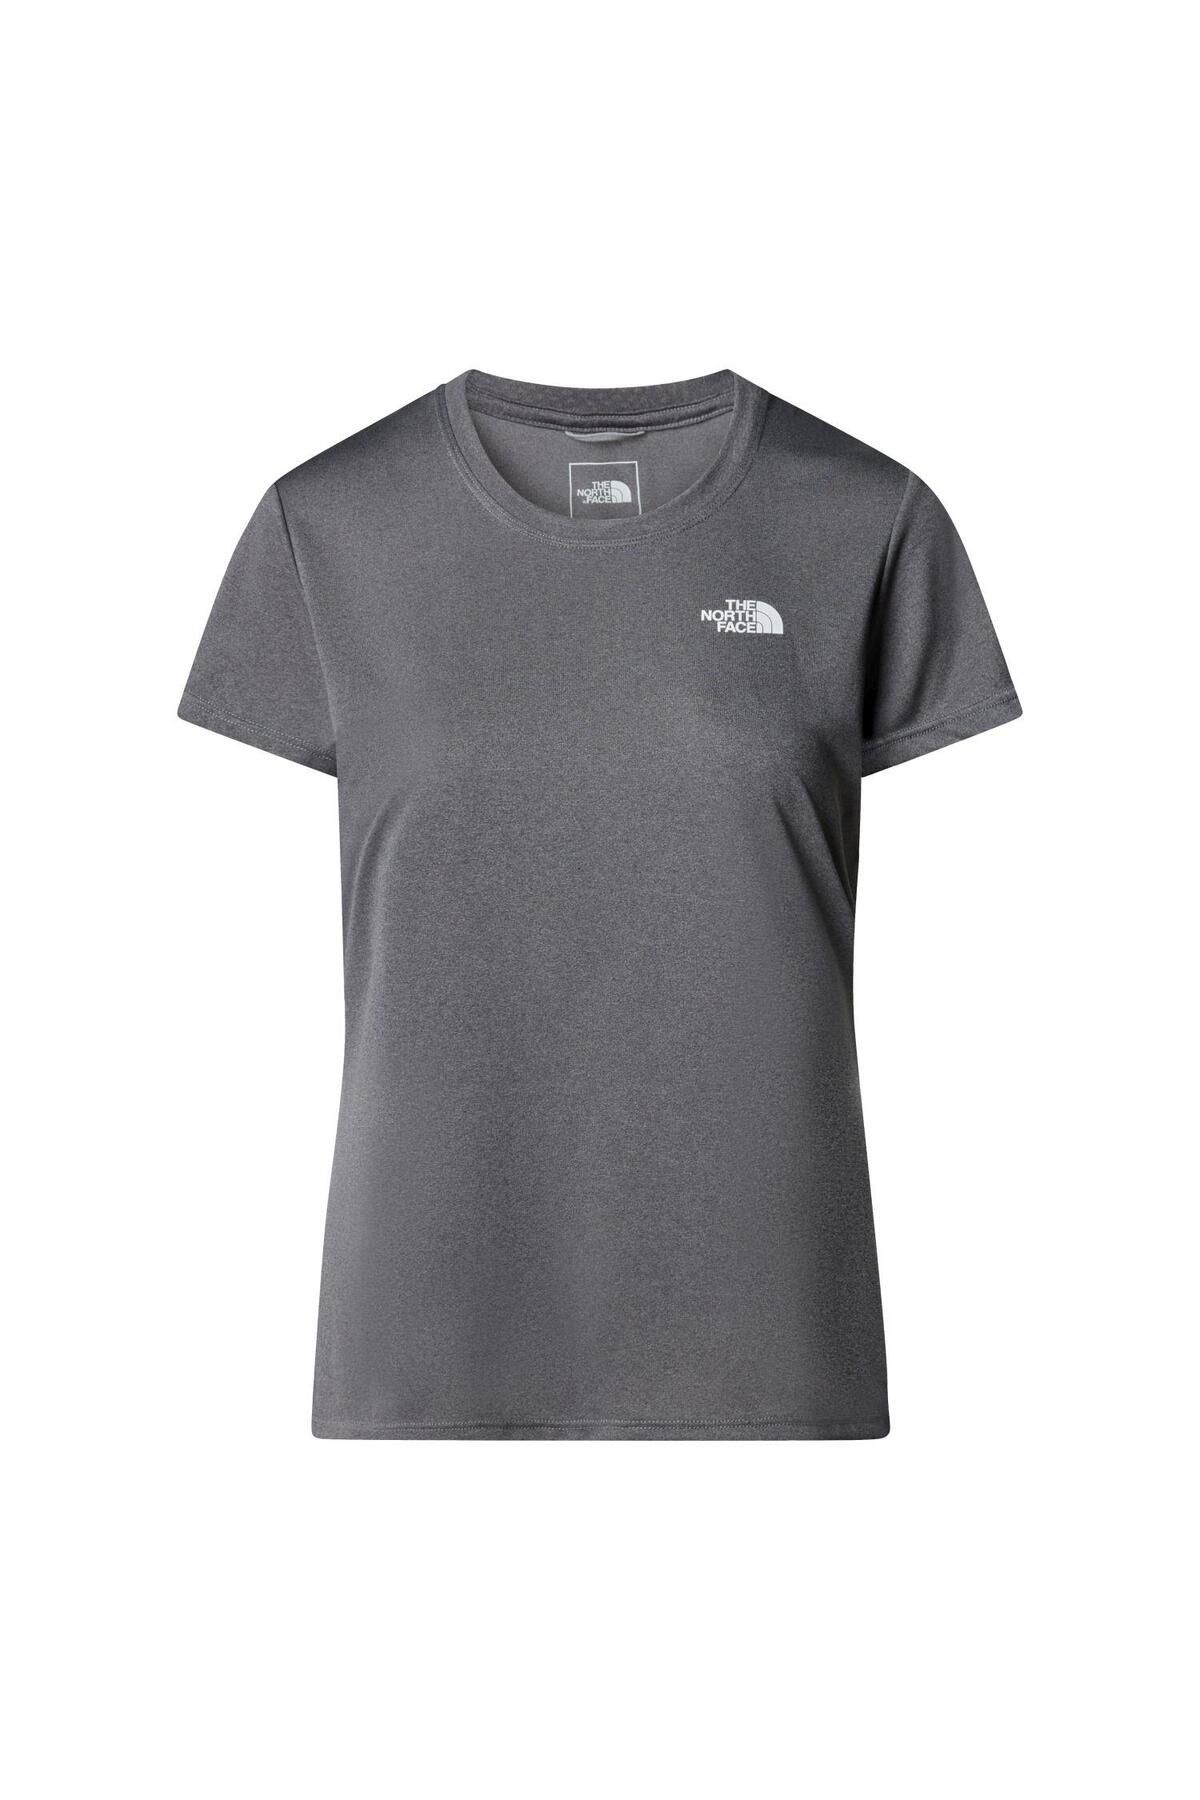 The North Face W REAXION AMP CREW - EU  T-Shirt NF00CE0T0V31 Gri-M